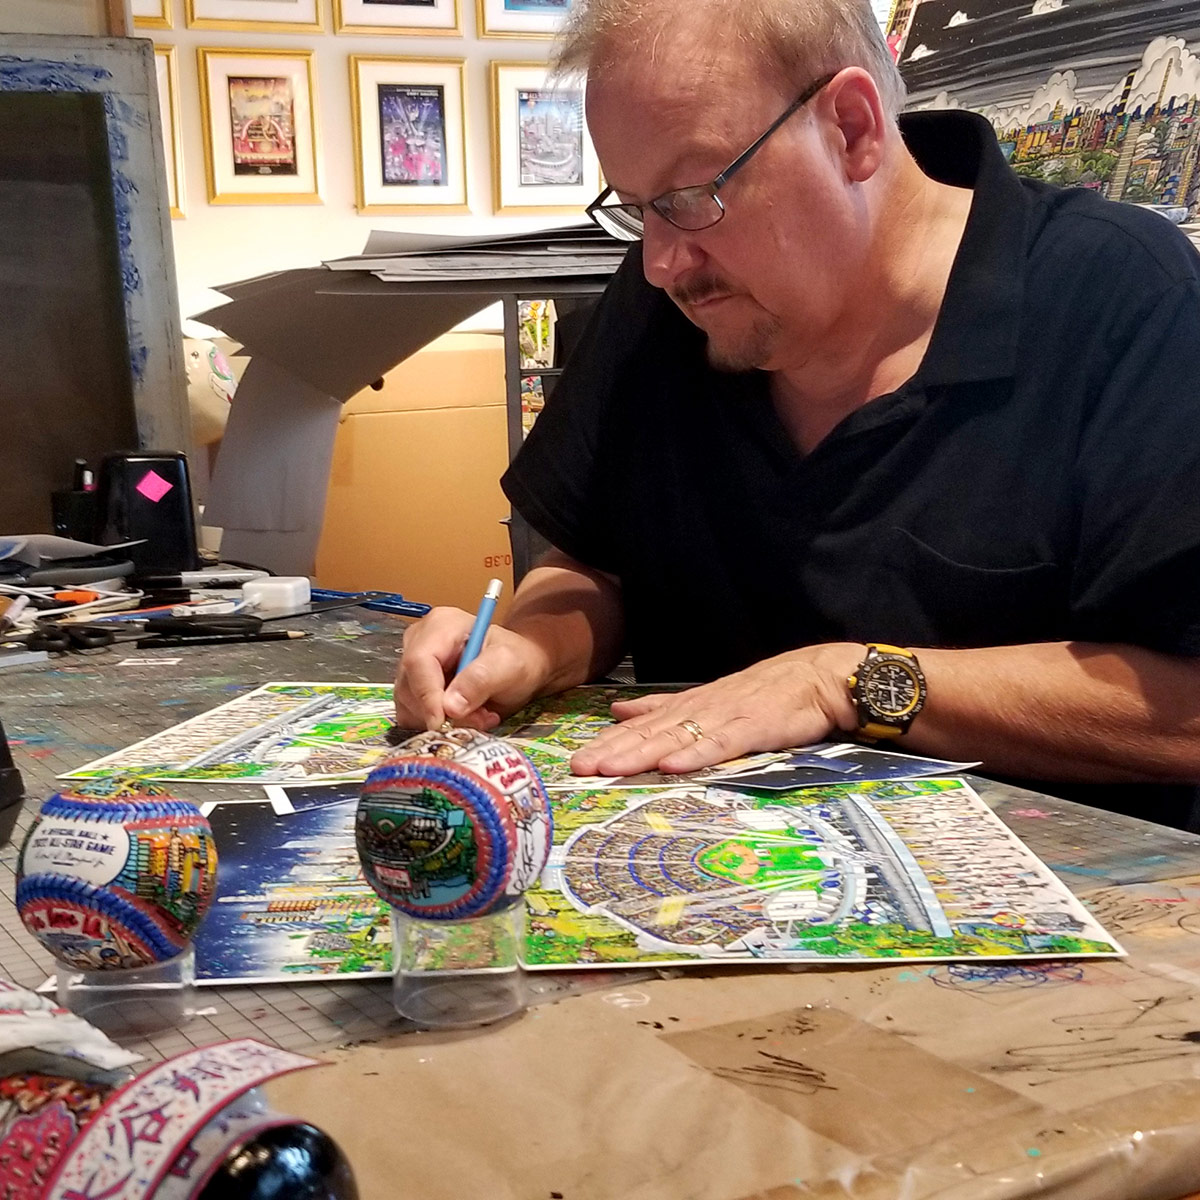 Behind the scenes of Charles Fazzino working on MLB Popart baseballs for All Stars game 2022